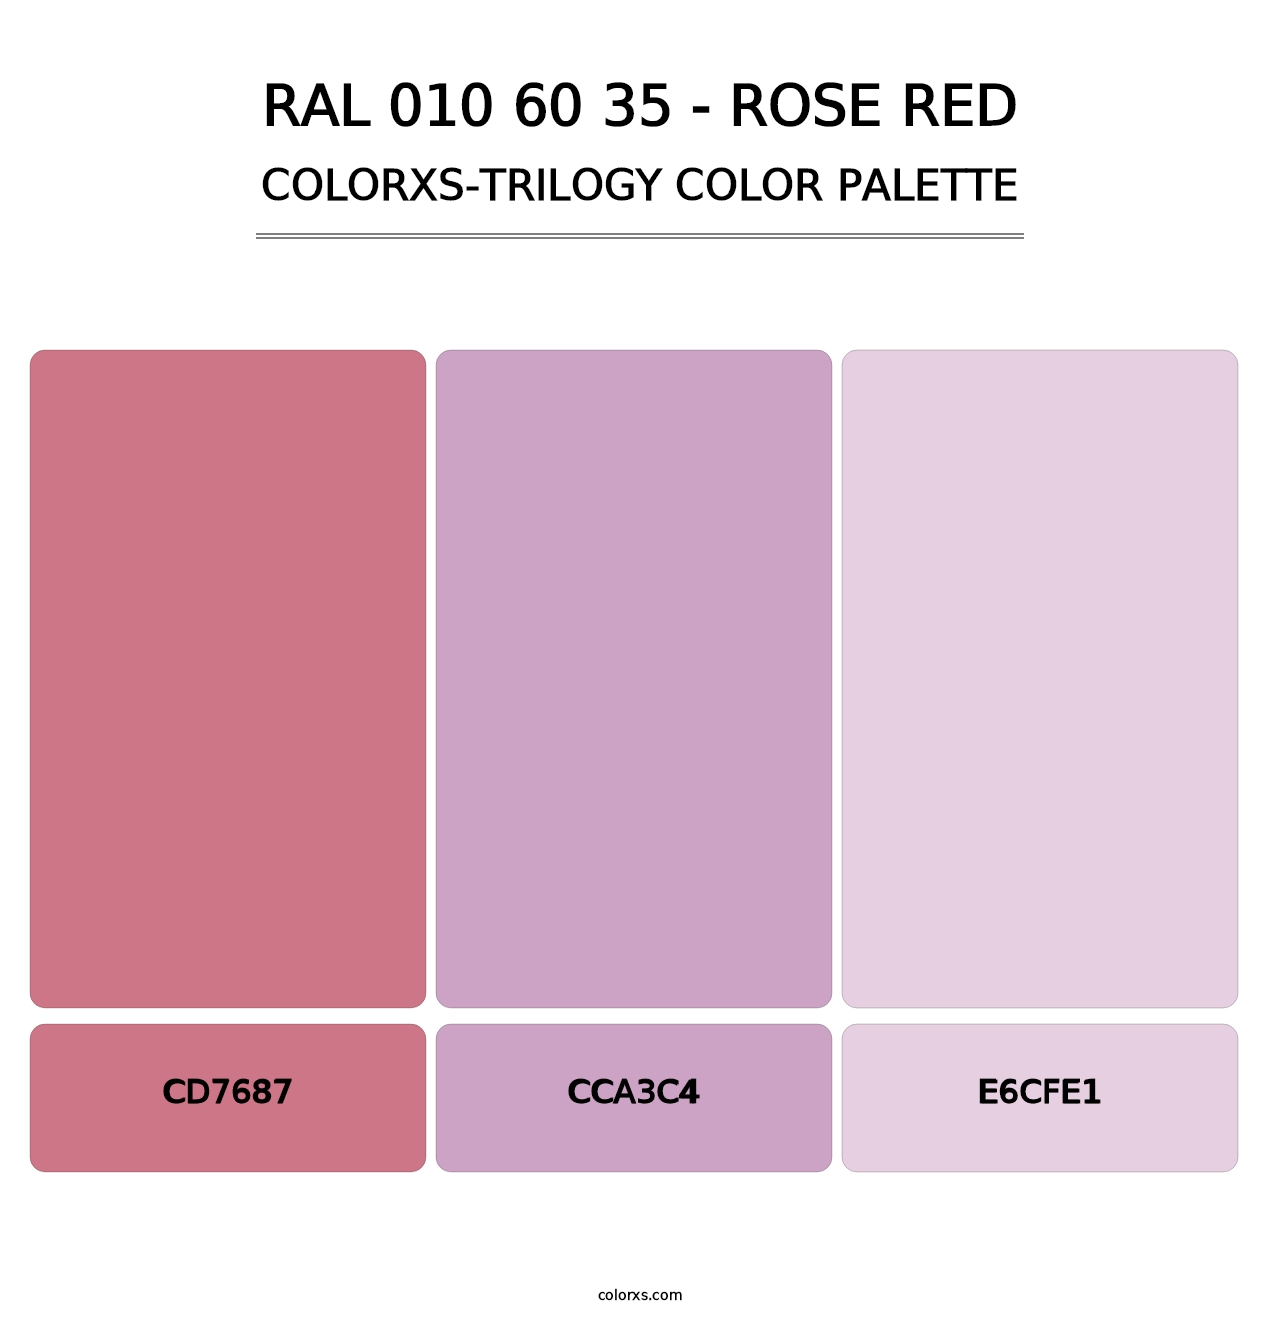 RAL 010 60 35 - Rose Red - Colorxs Trilogy Palette